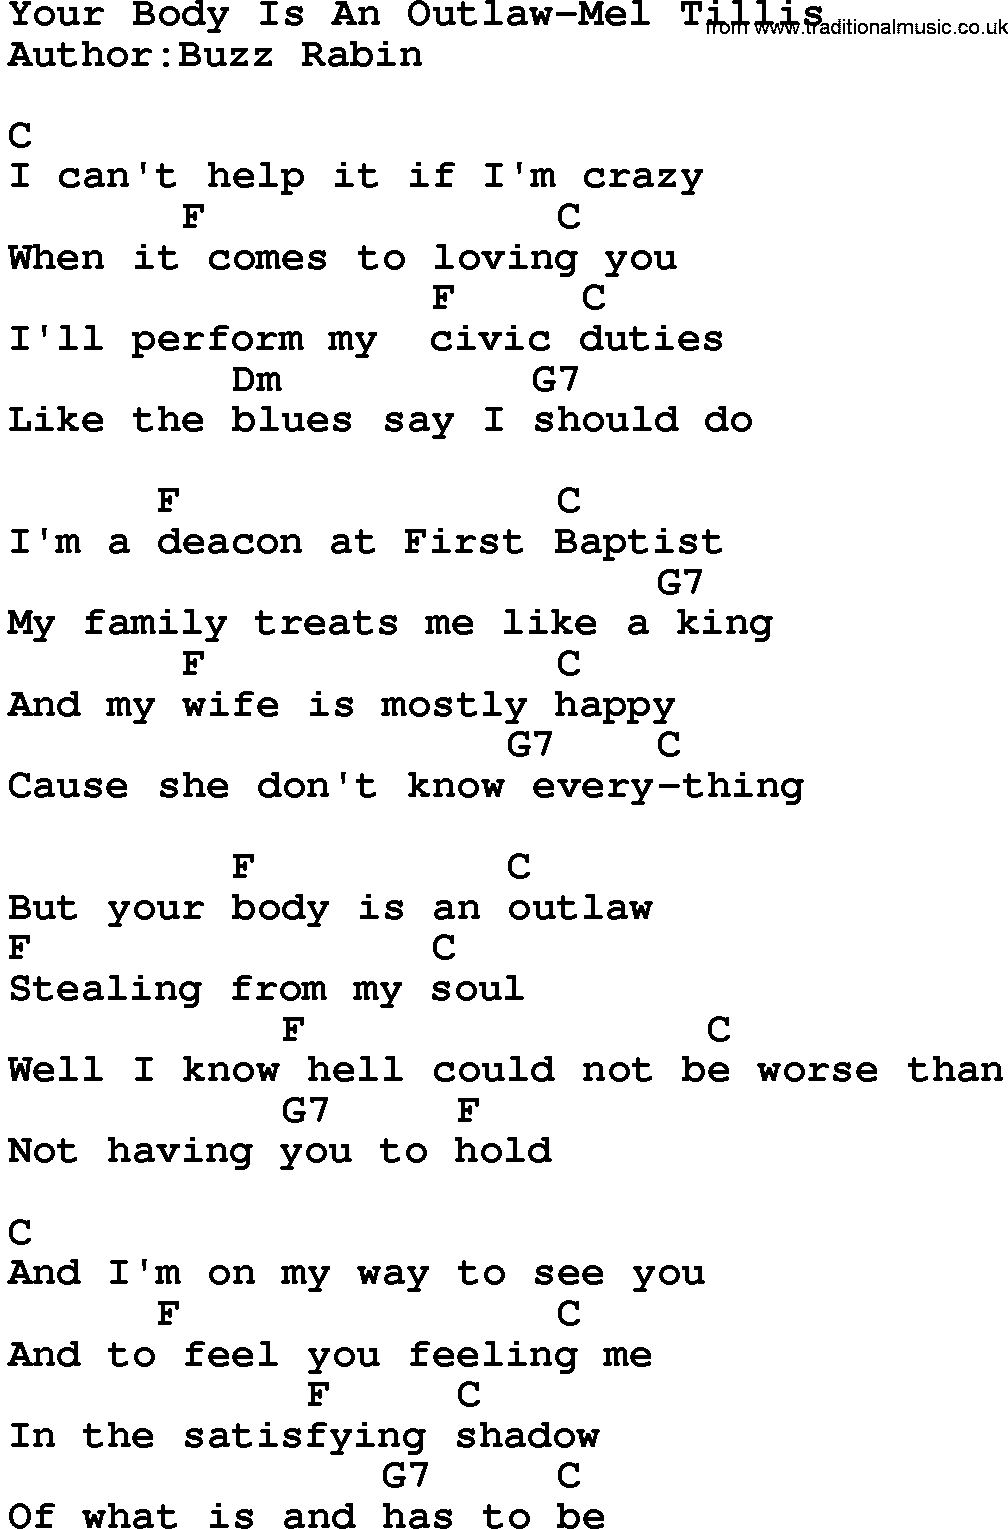 Country music song: Your Body Is An Outlaw-Mel Tillis lyrics and chords